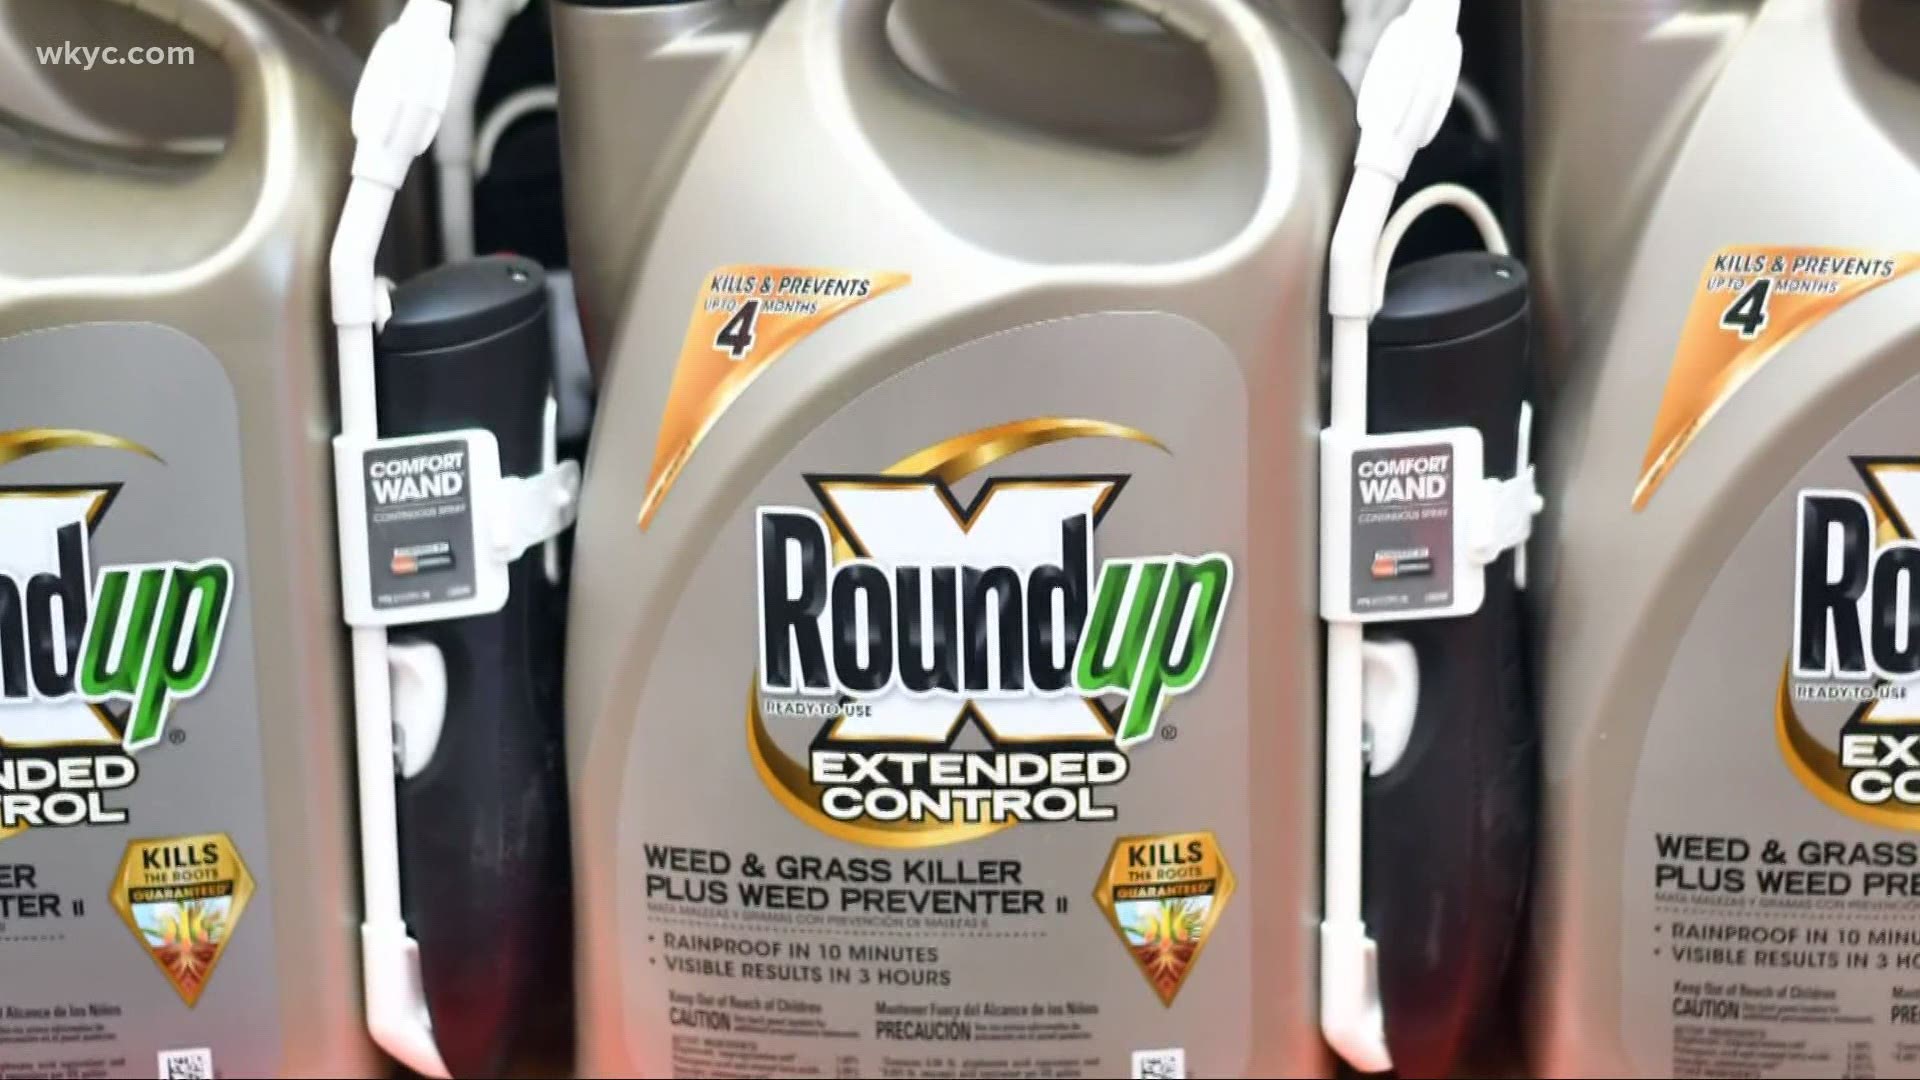 The lawsuit was over weedkiller Round-up.  A school groundskeeper claimed the weed-killer caused his non-Hodgkin's lymphoma.